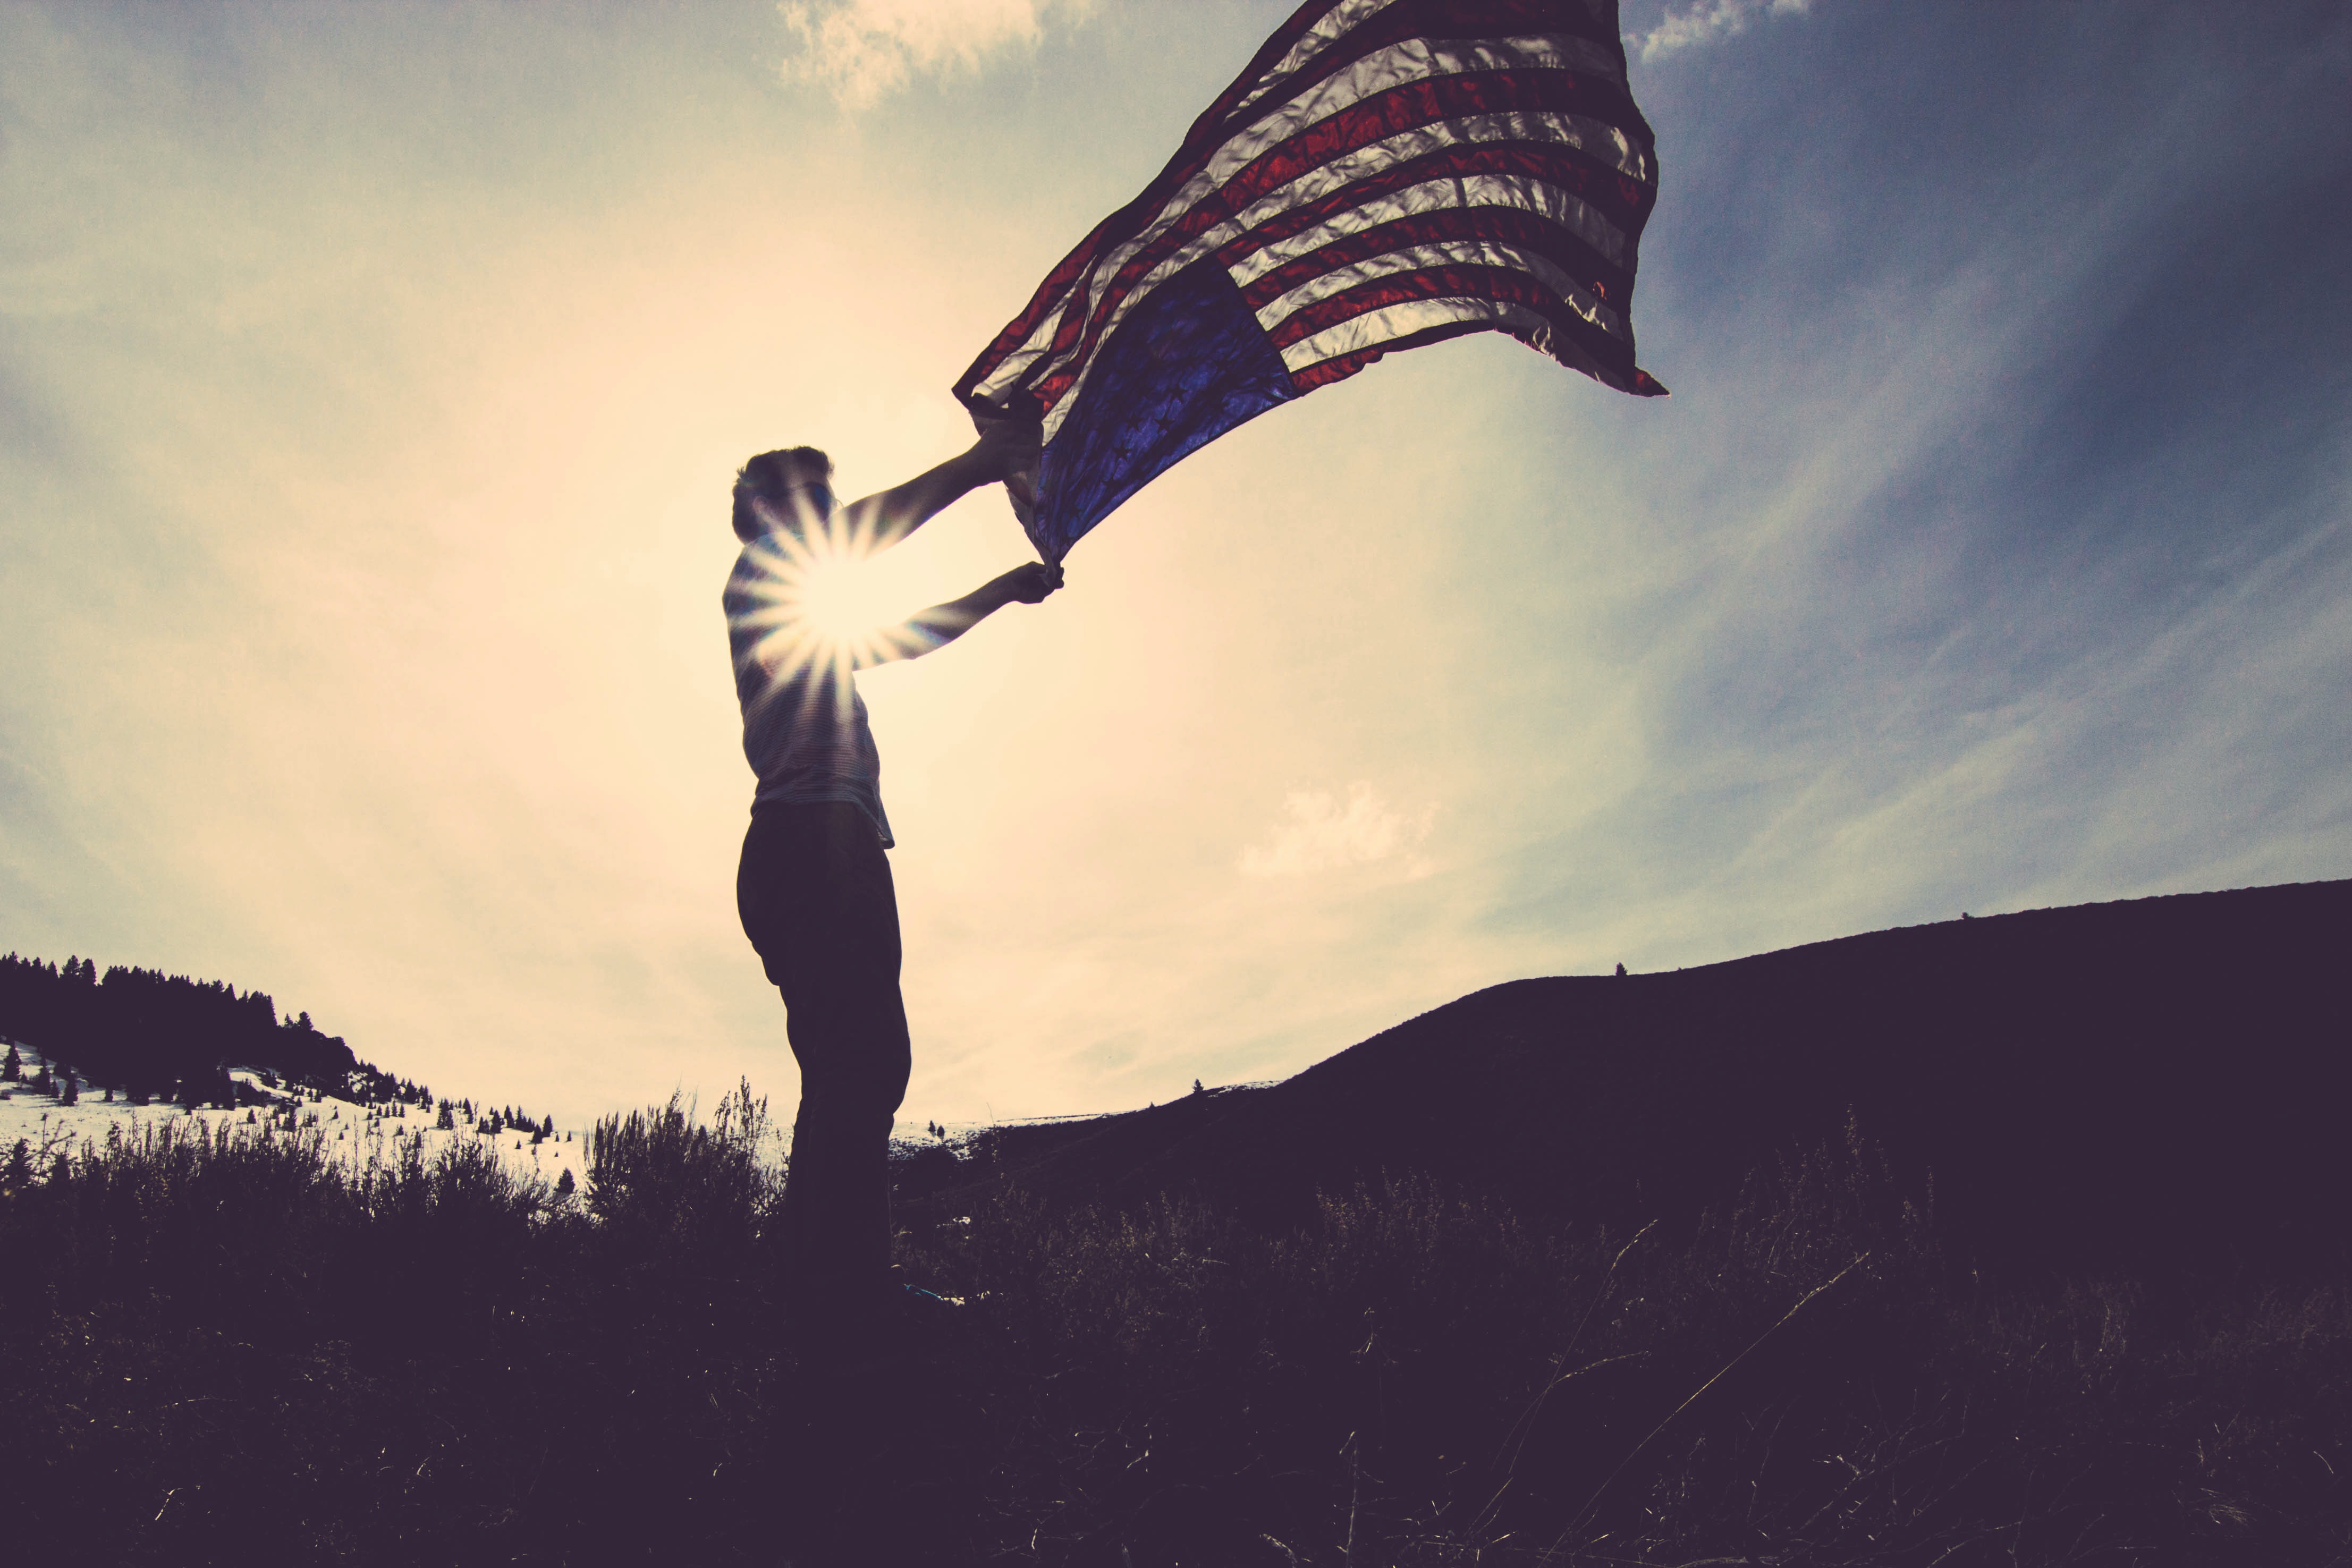 A picture of a man holding an american flag up, with the sun in the background casting him in a silhouette. The flag is still visible.